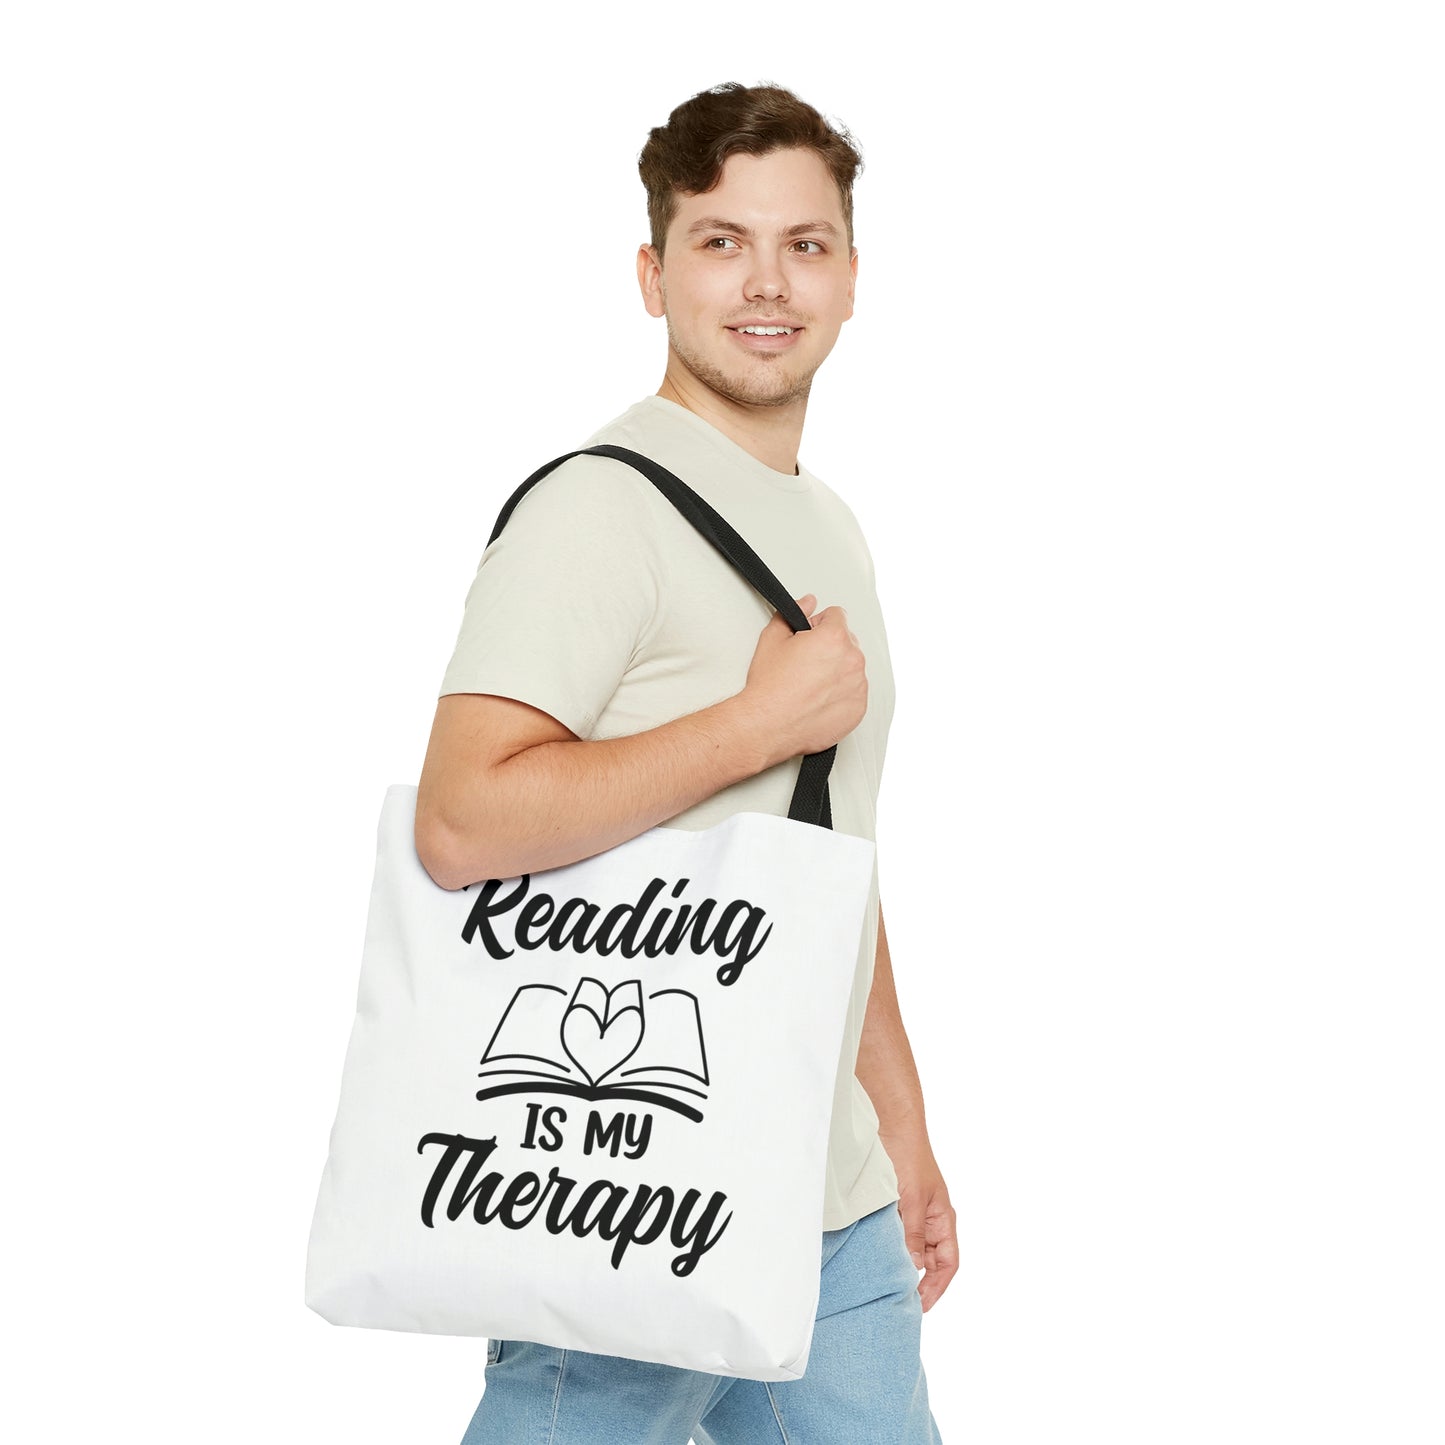 "Reading Is My Therapy" Large Tote Bag